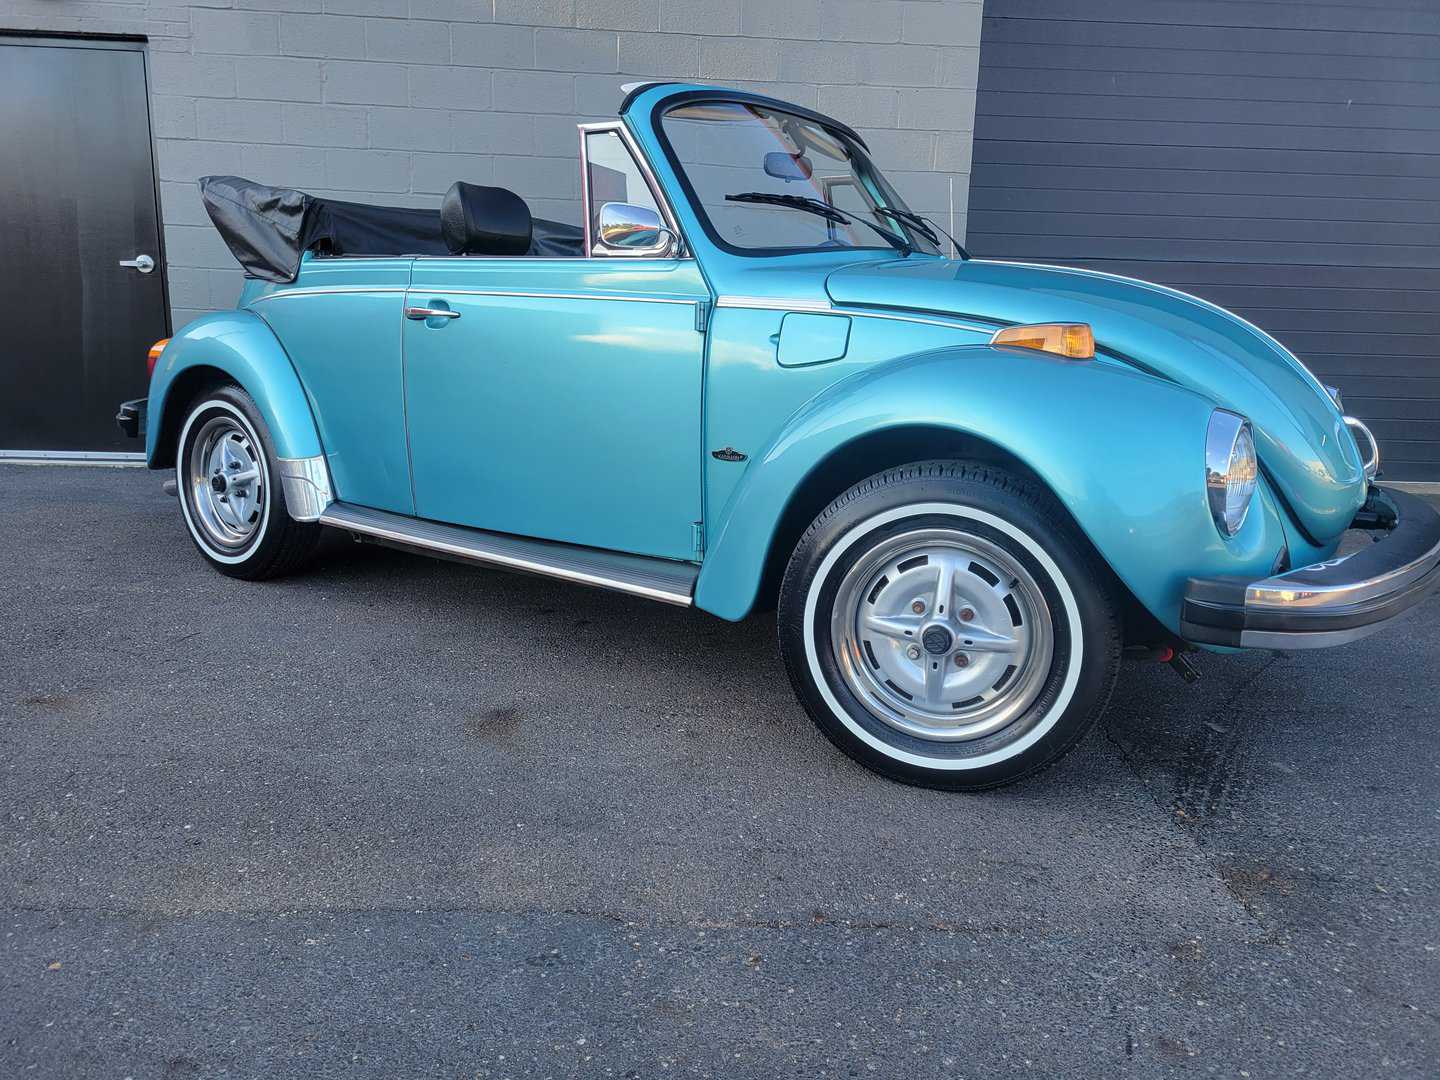 A 1979 blue Volkswagen Beetle Convertible parked in front of a building.